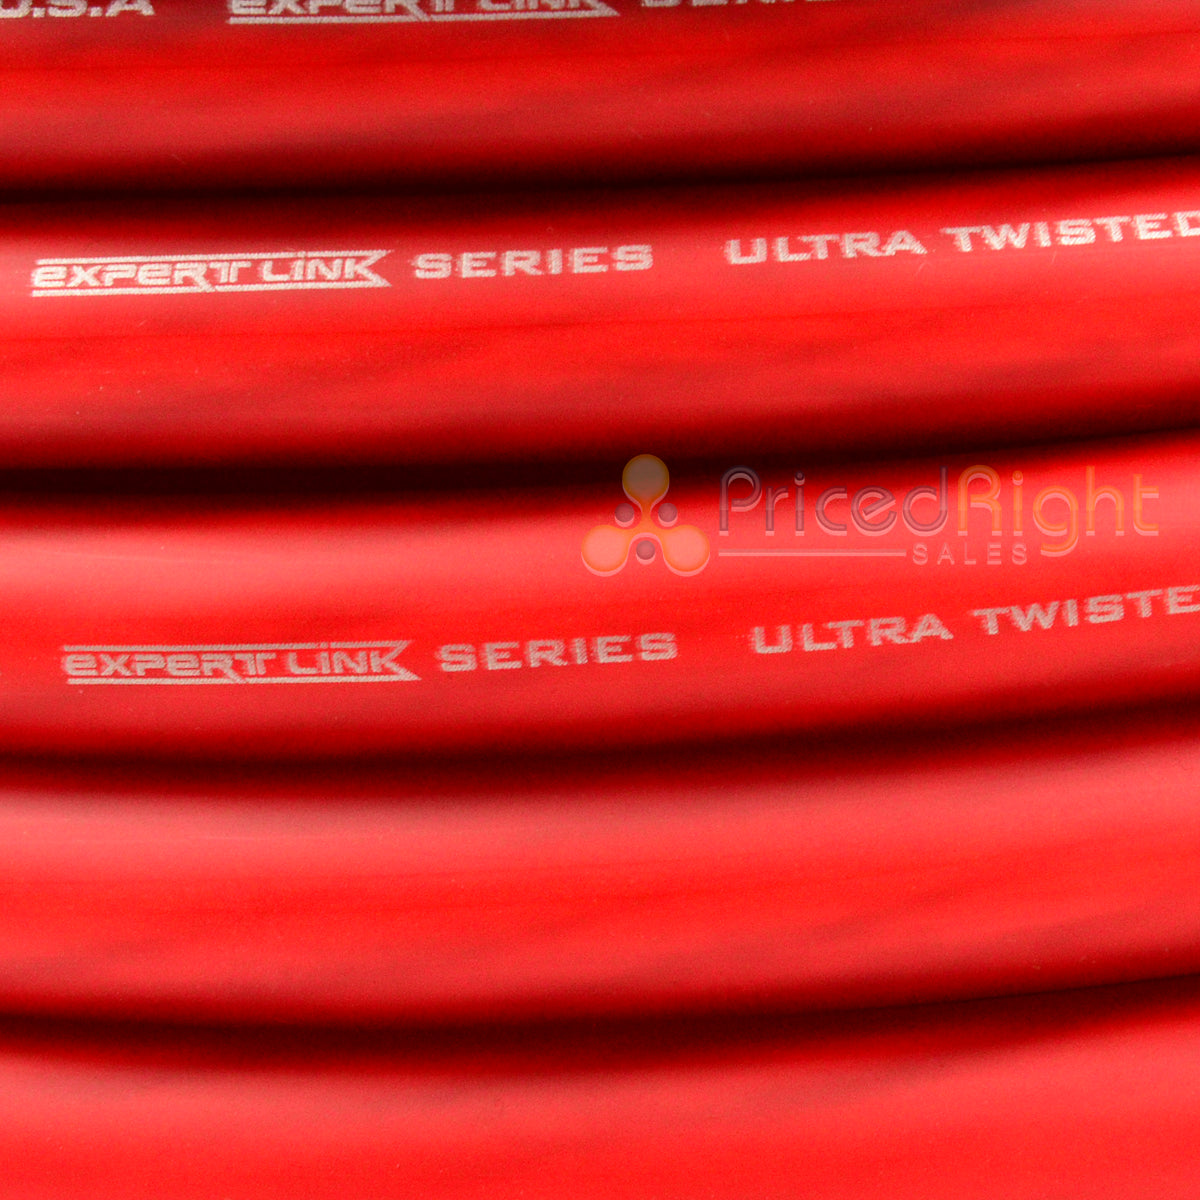 25 FT 1/0 Gauge Power Wire OFC Copper Red Flexible Cable Xscorpion PW0.50R